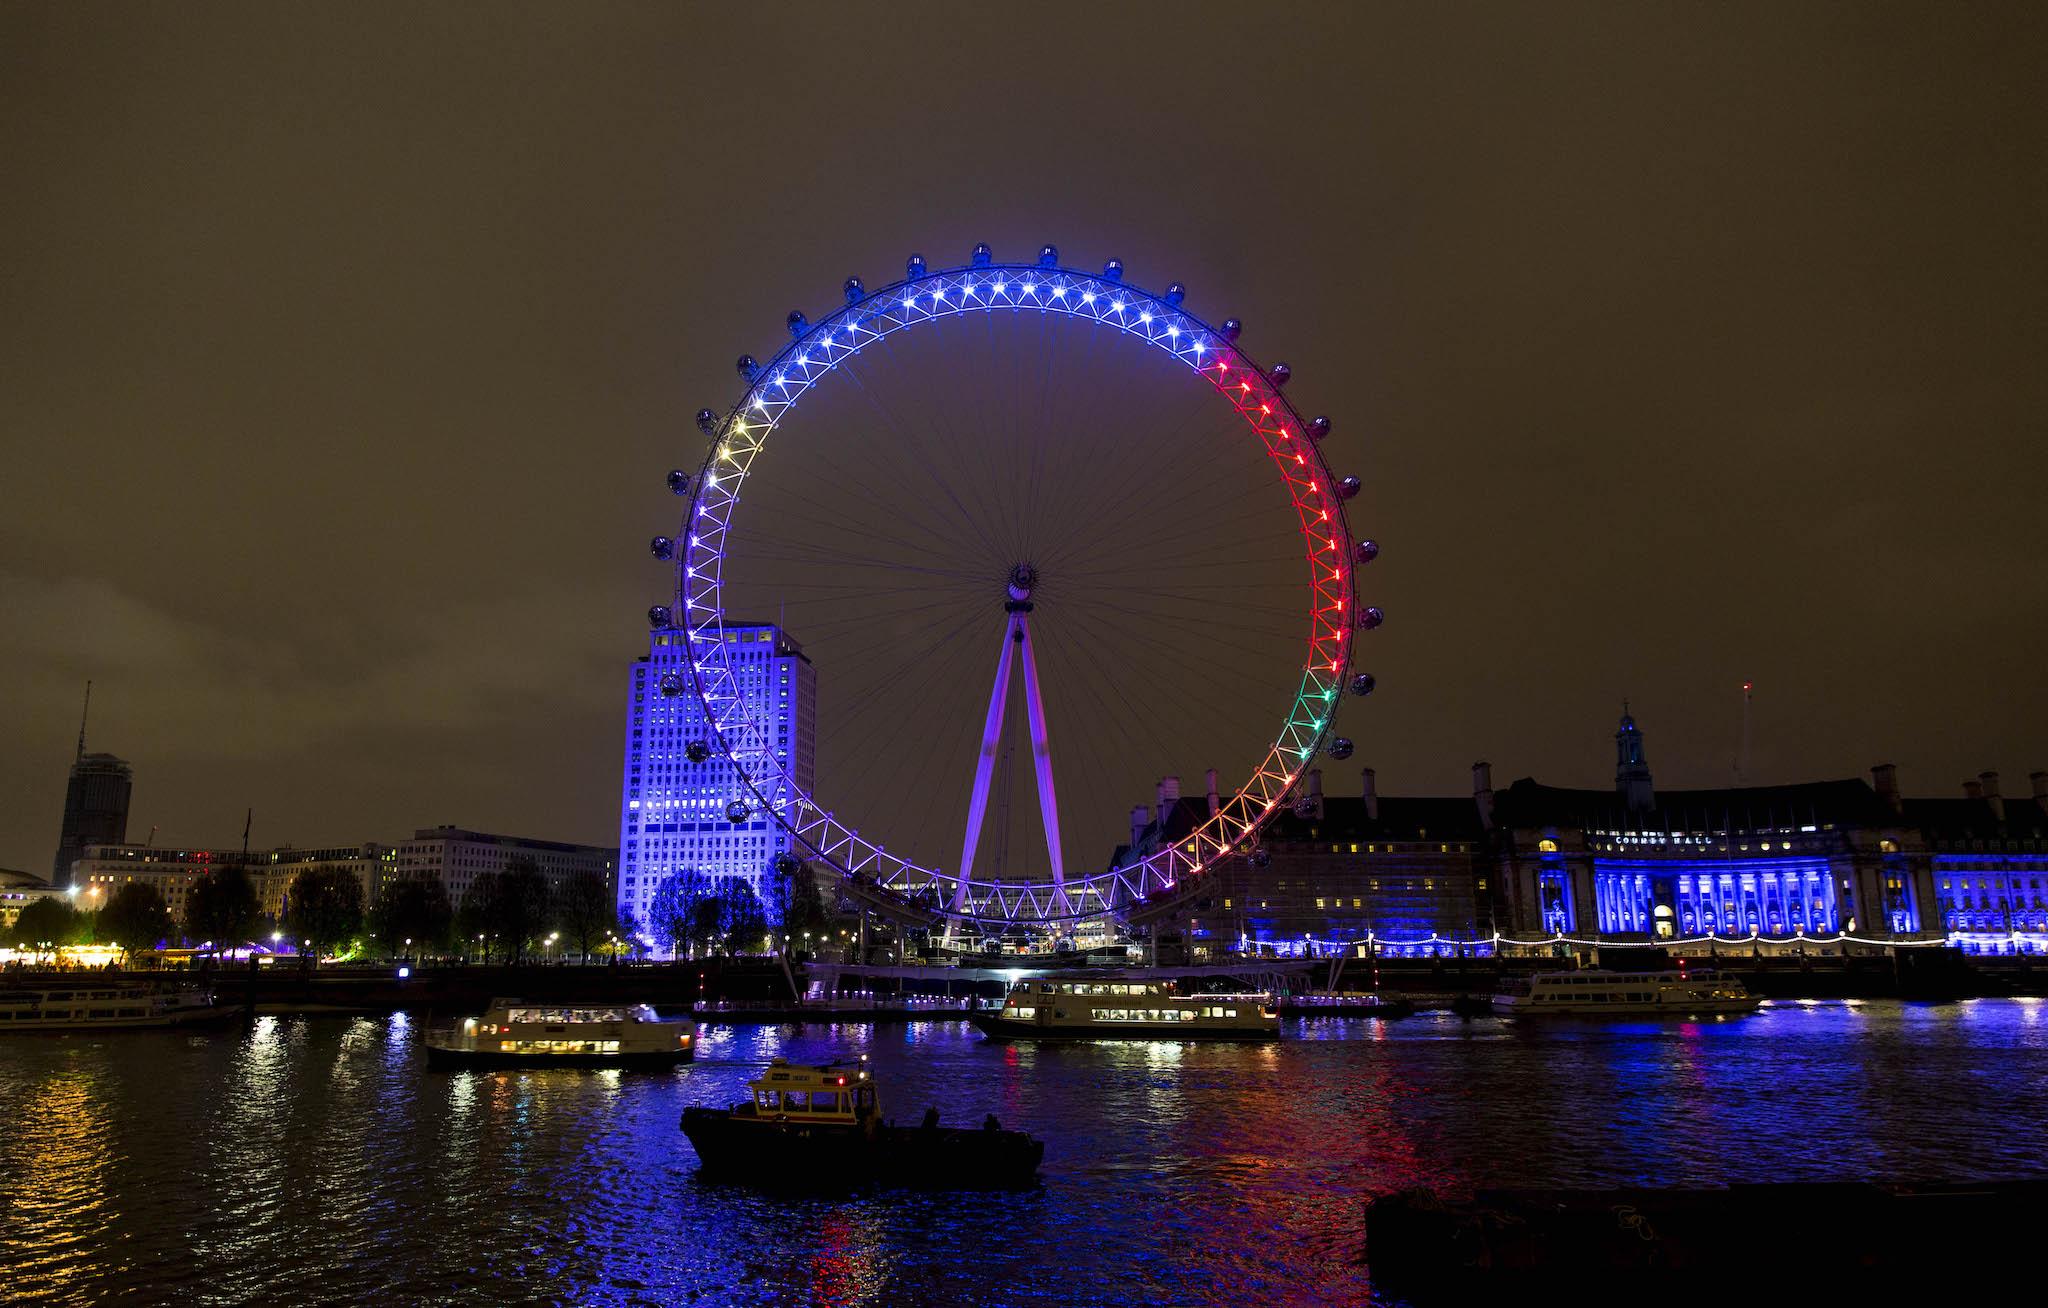 Facebook lights up the London Eye with the nation's general election conversations